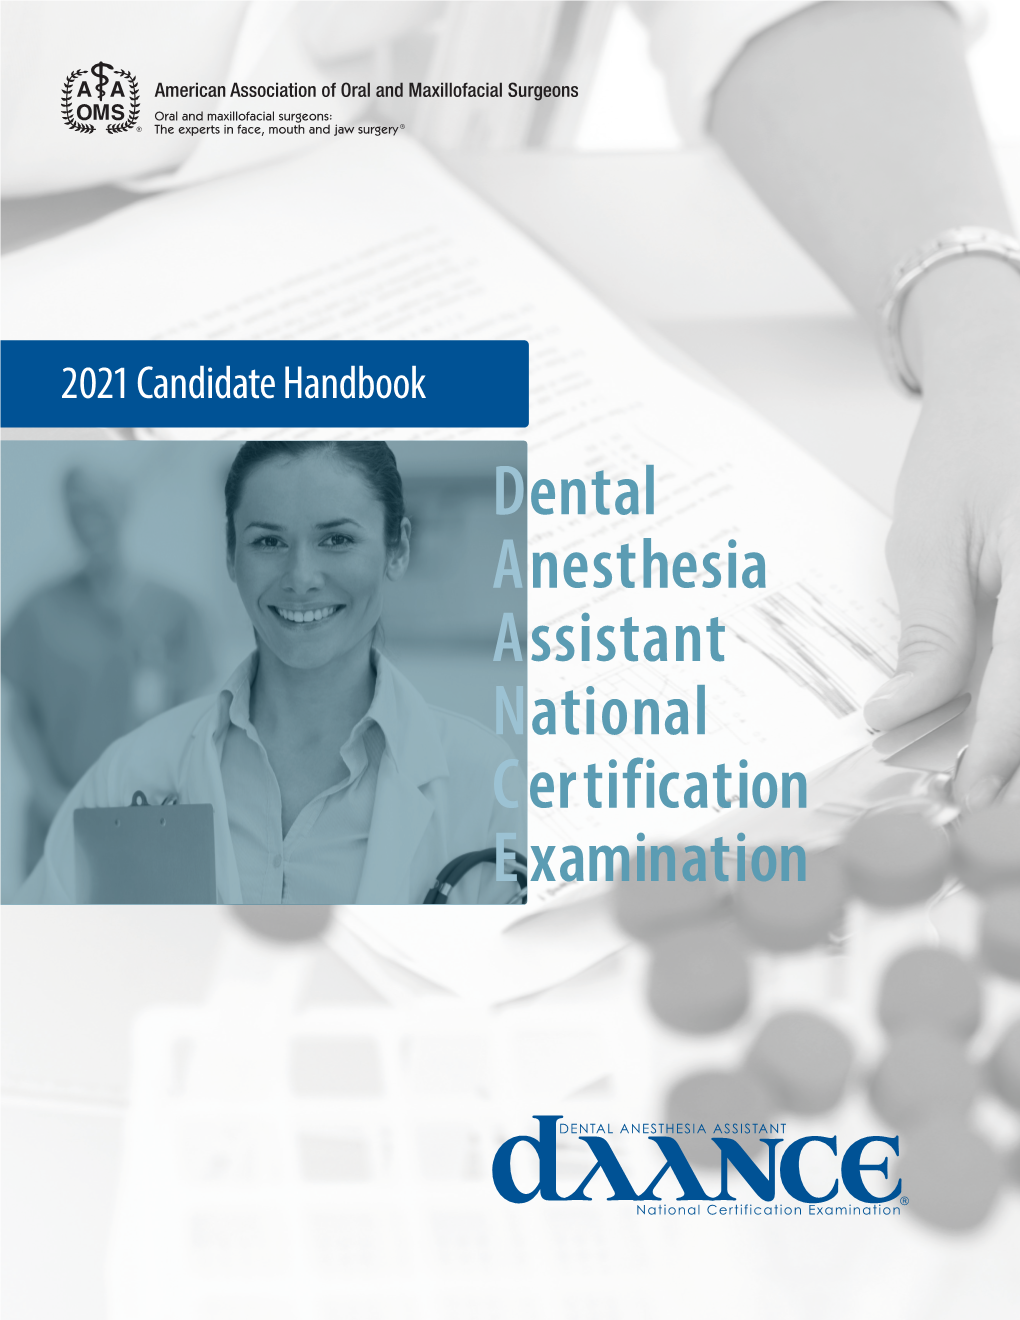 Dental Anesthesia Assistant National Certification Examination STATEMENT of NONDISCRIMINATION Advisory Committee (DAANCEAC)